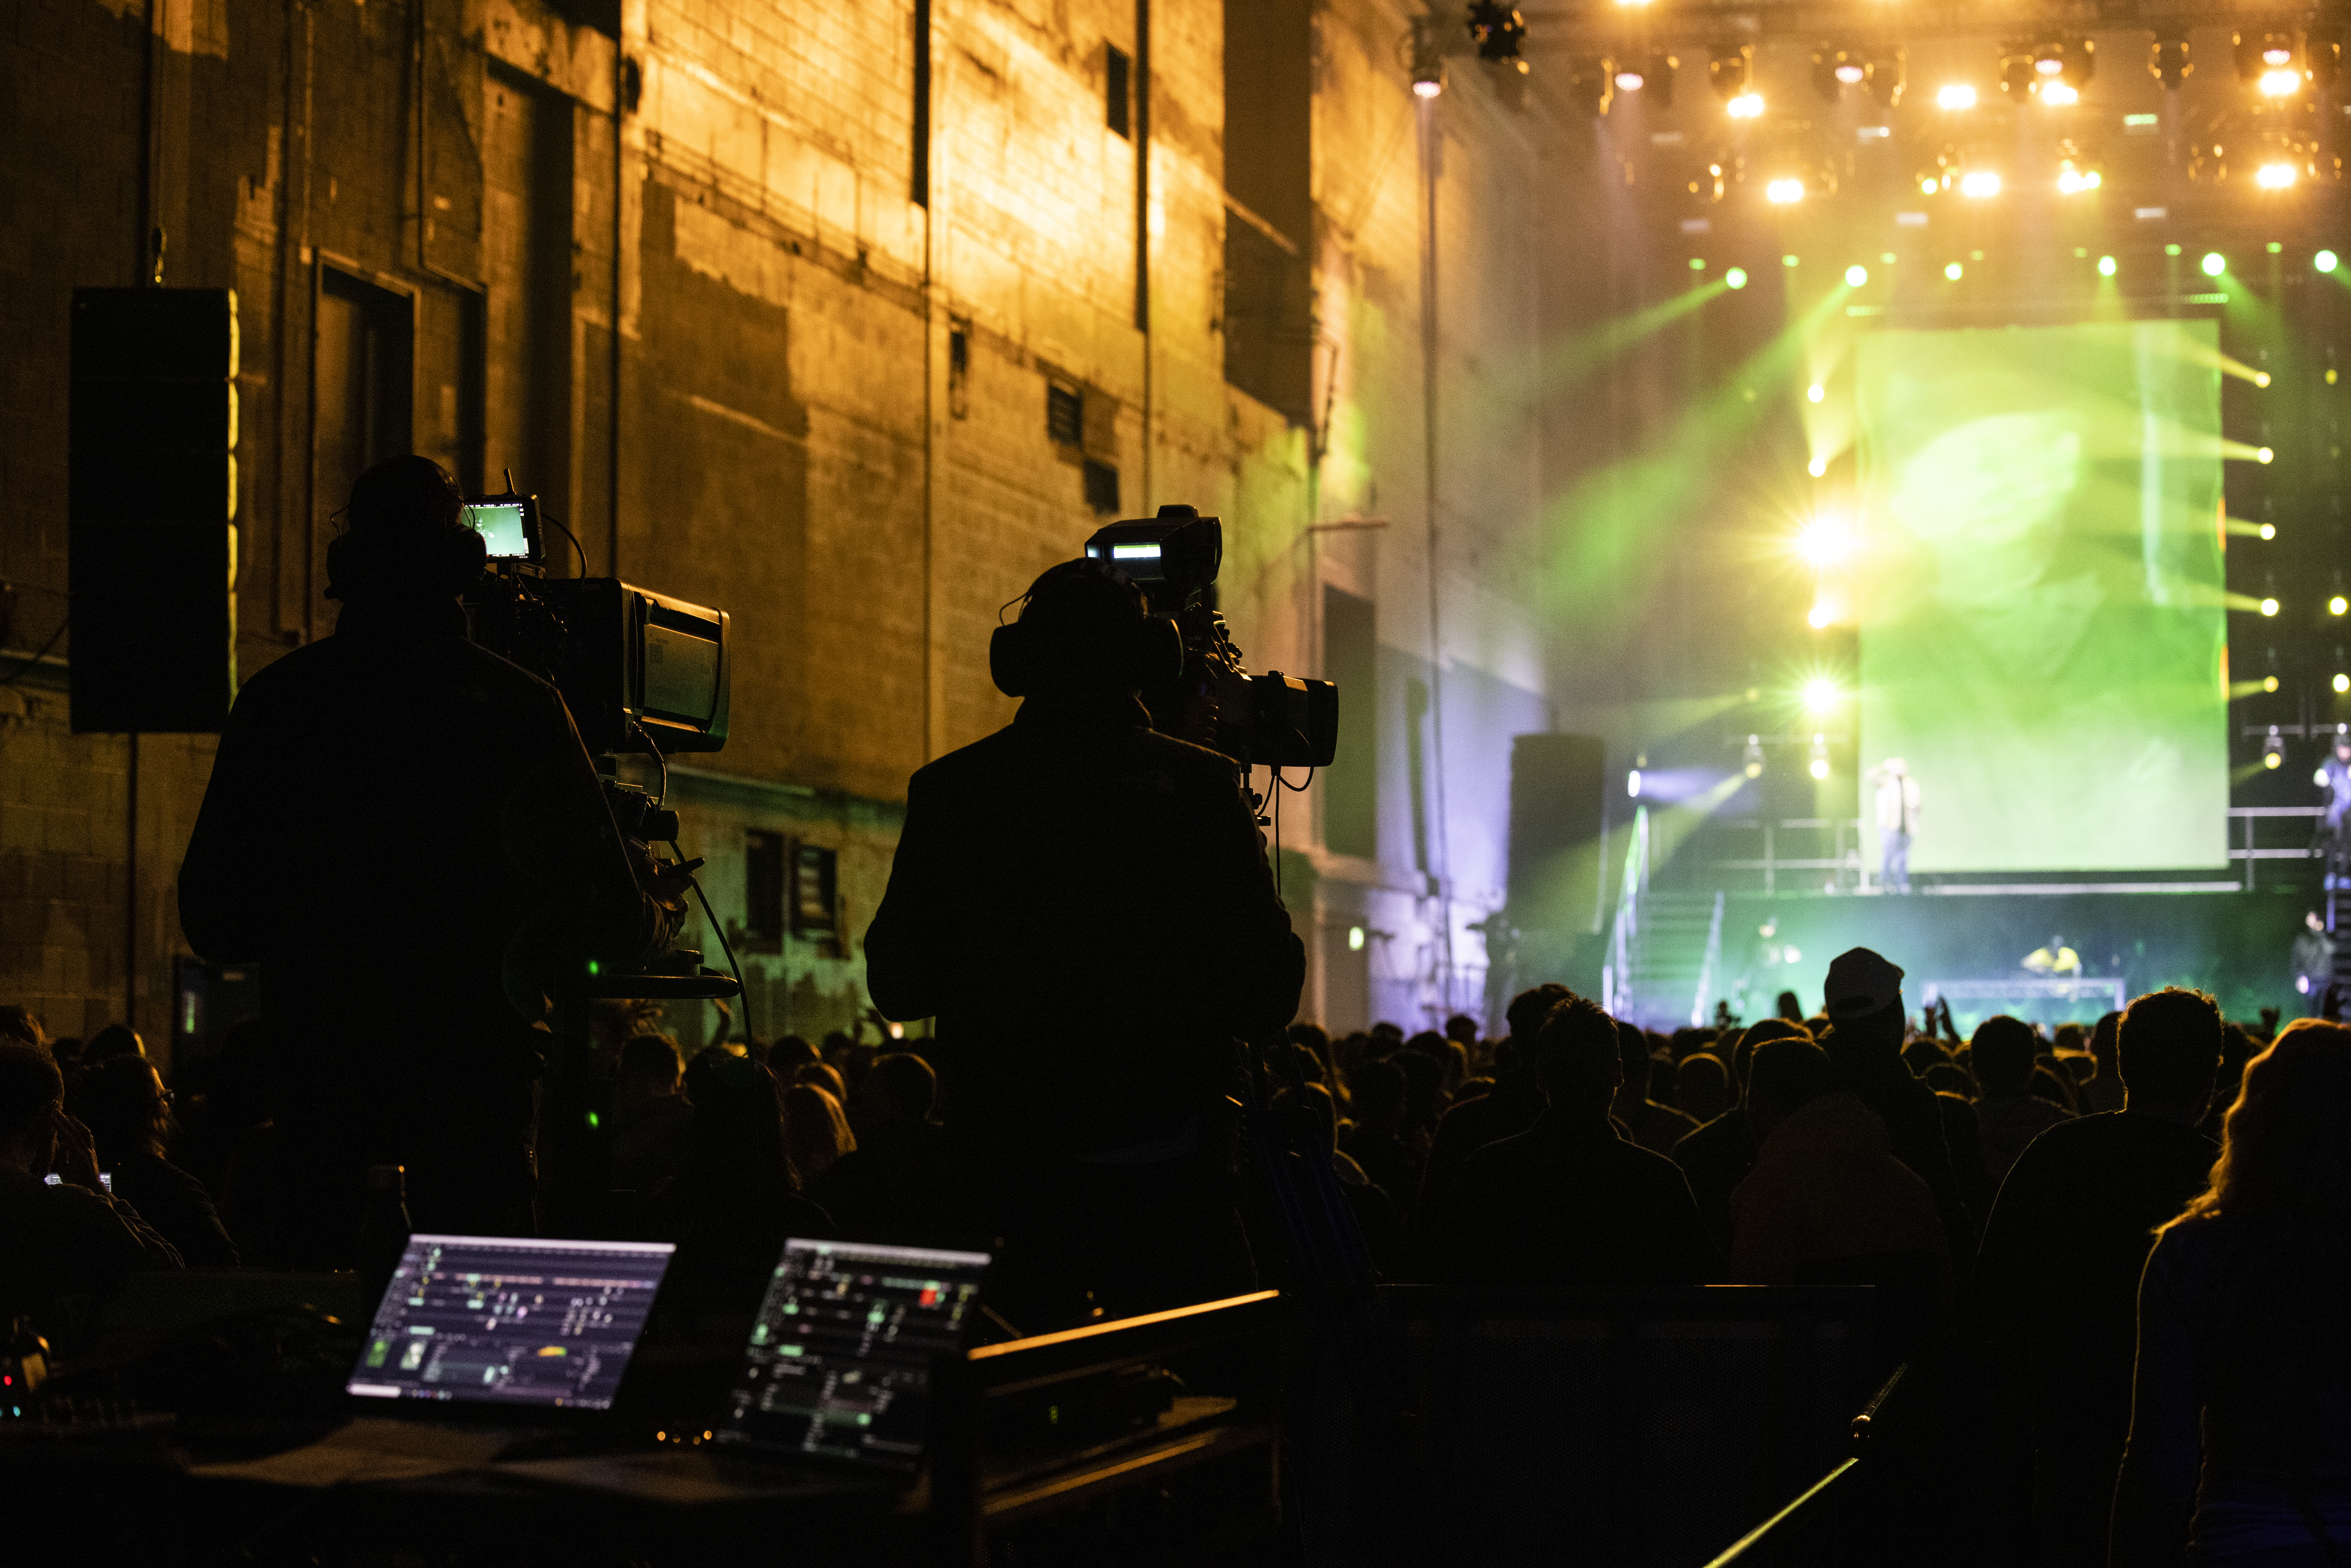 Kurupt FM live on stage at Printworks London shot from behind the broadcast  cameras